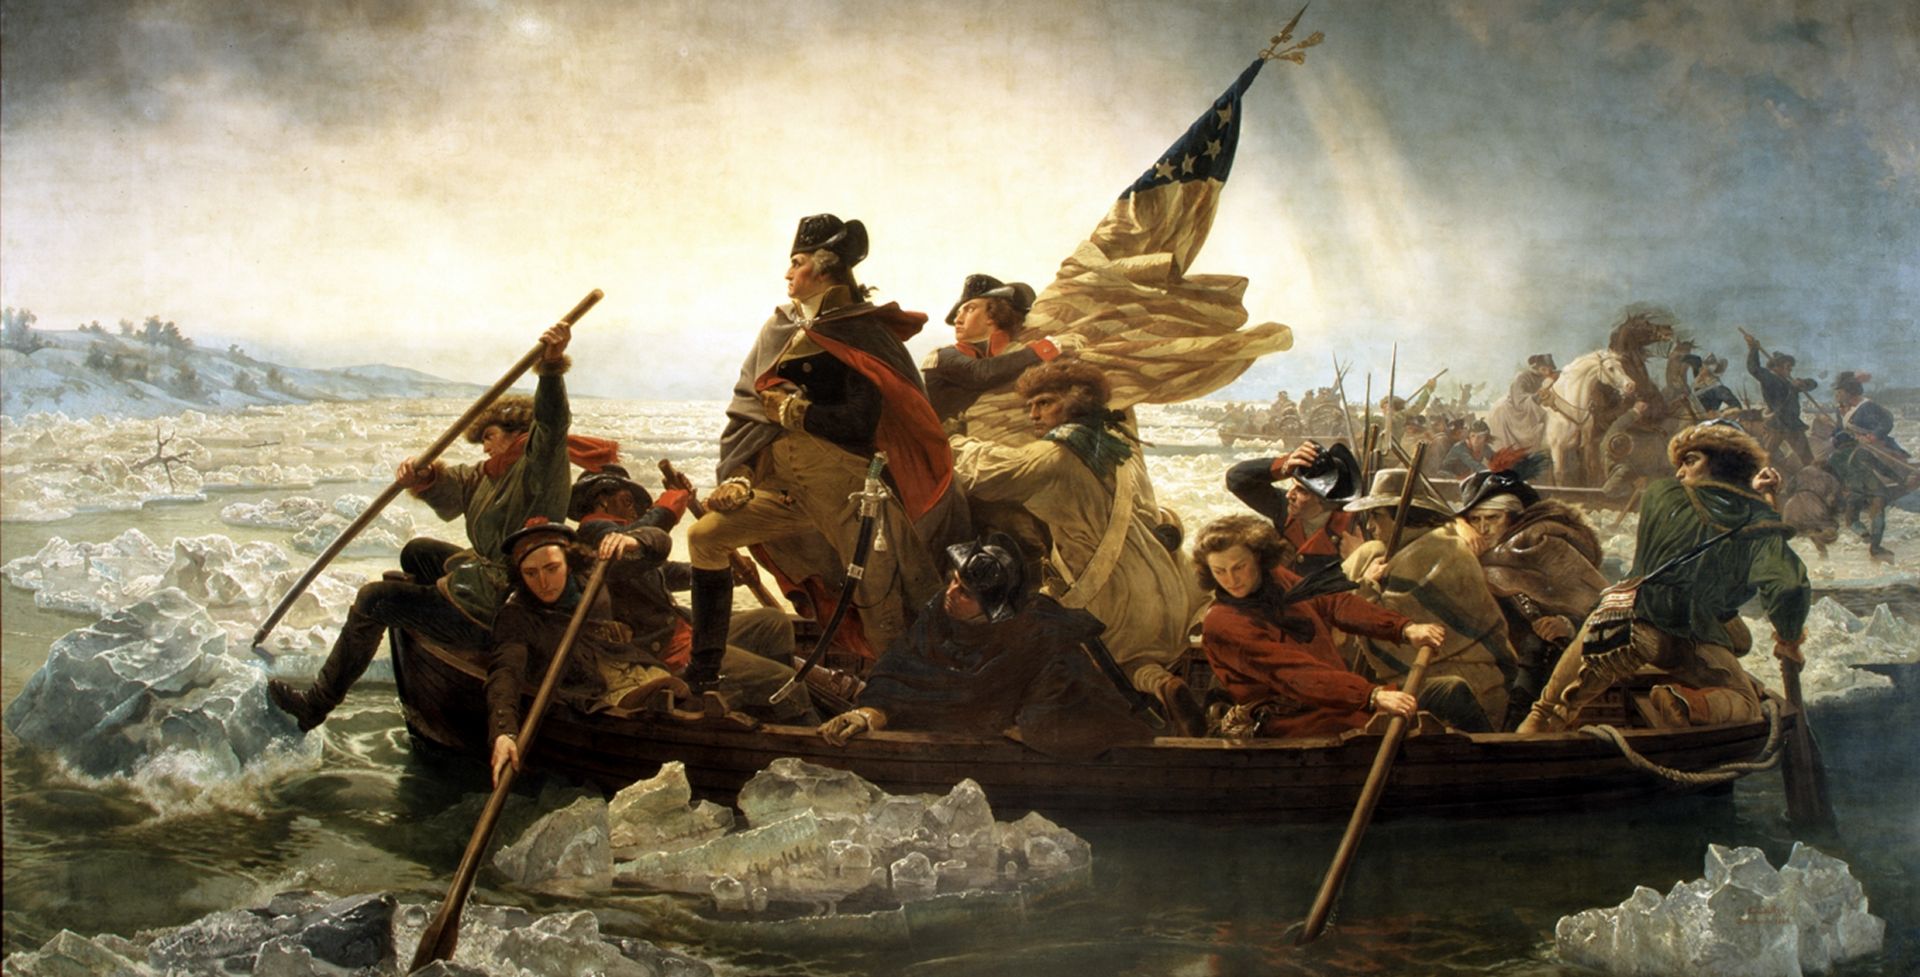 John Glover and the Marblehead men struggling to transport Washington and the American army across the Delaware is one of the most iconic images in American history. Metropolitan Museum of Art